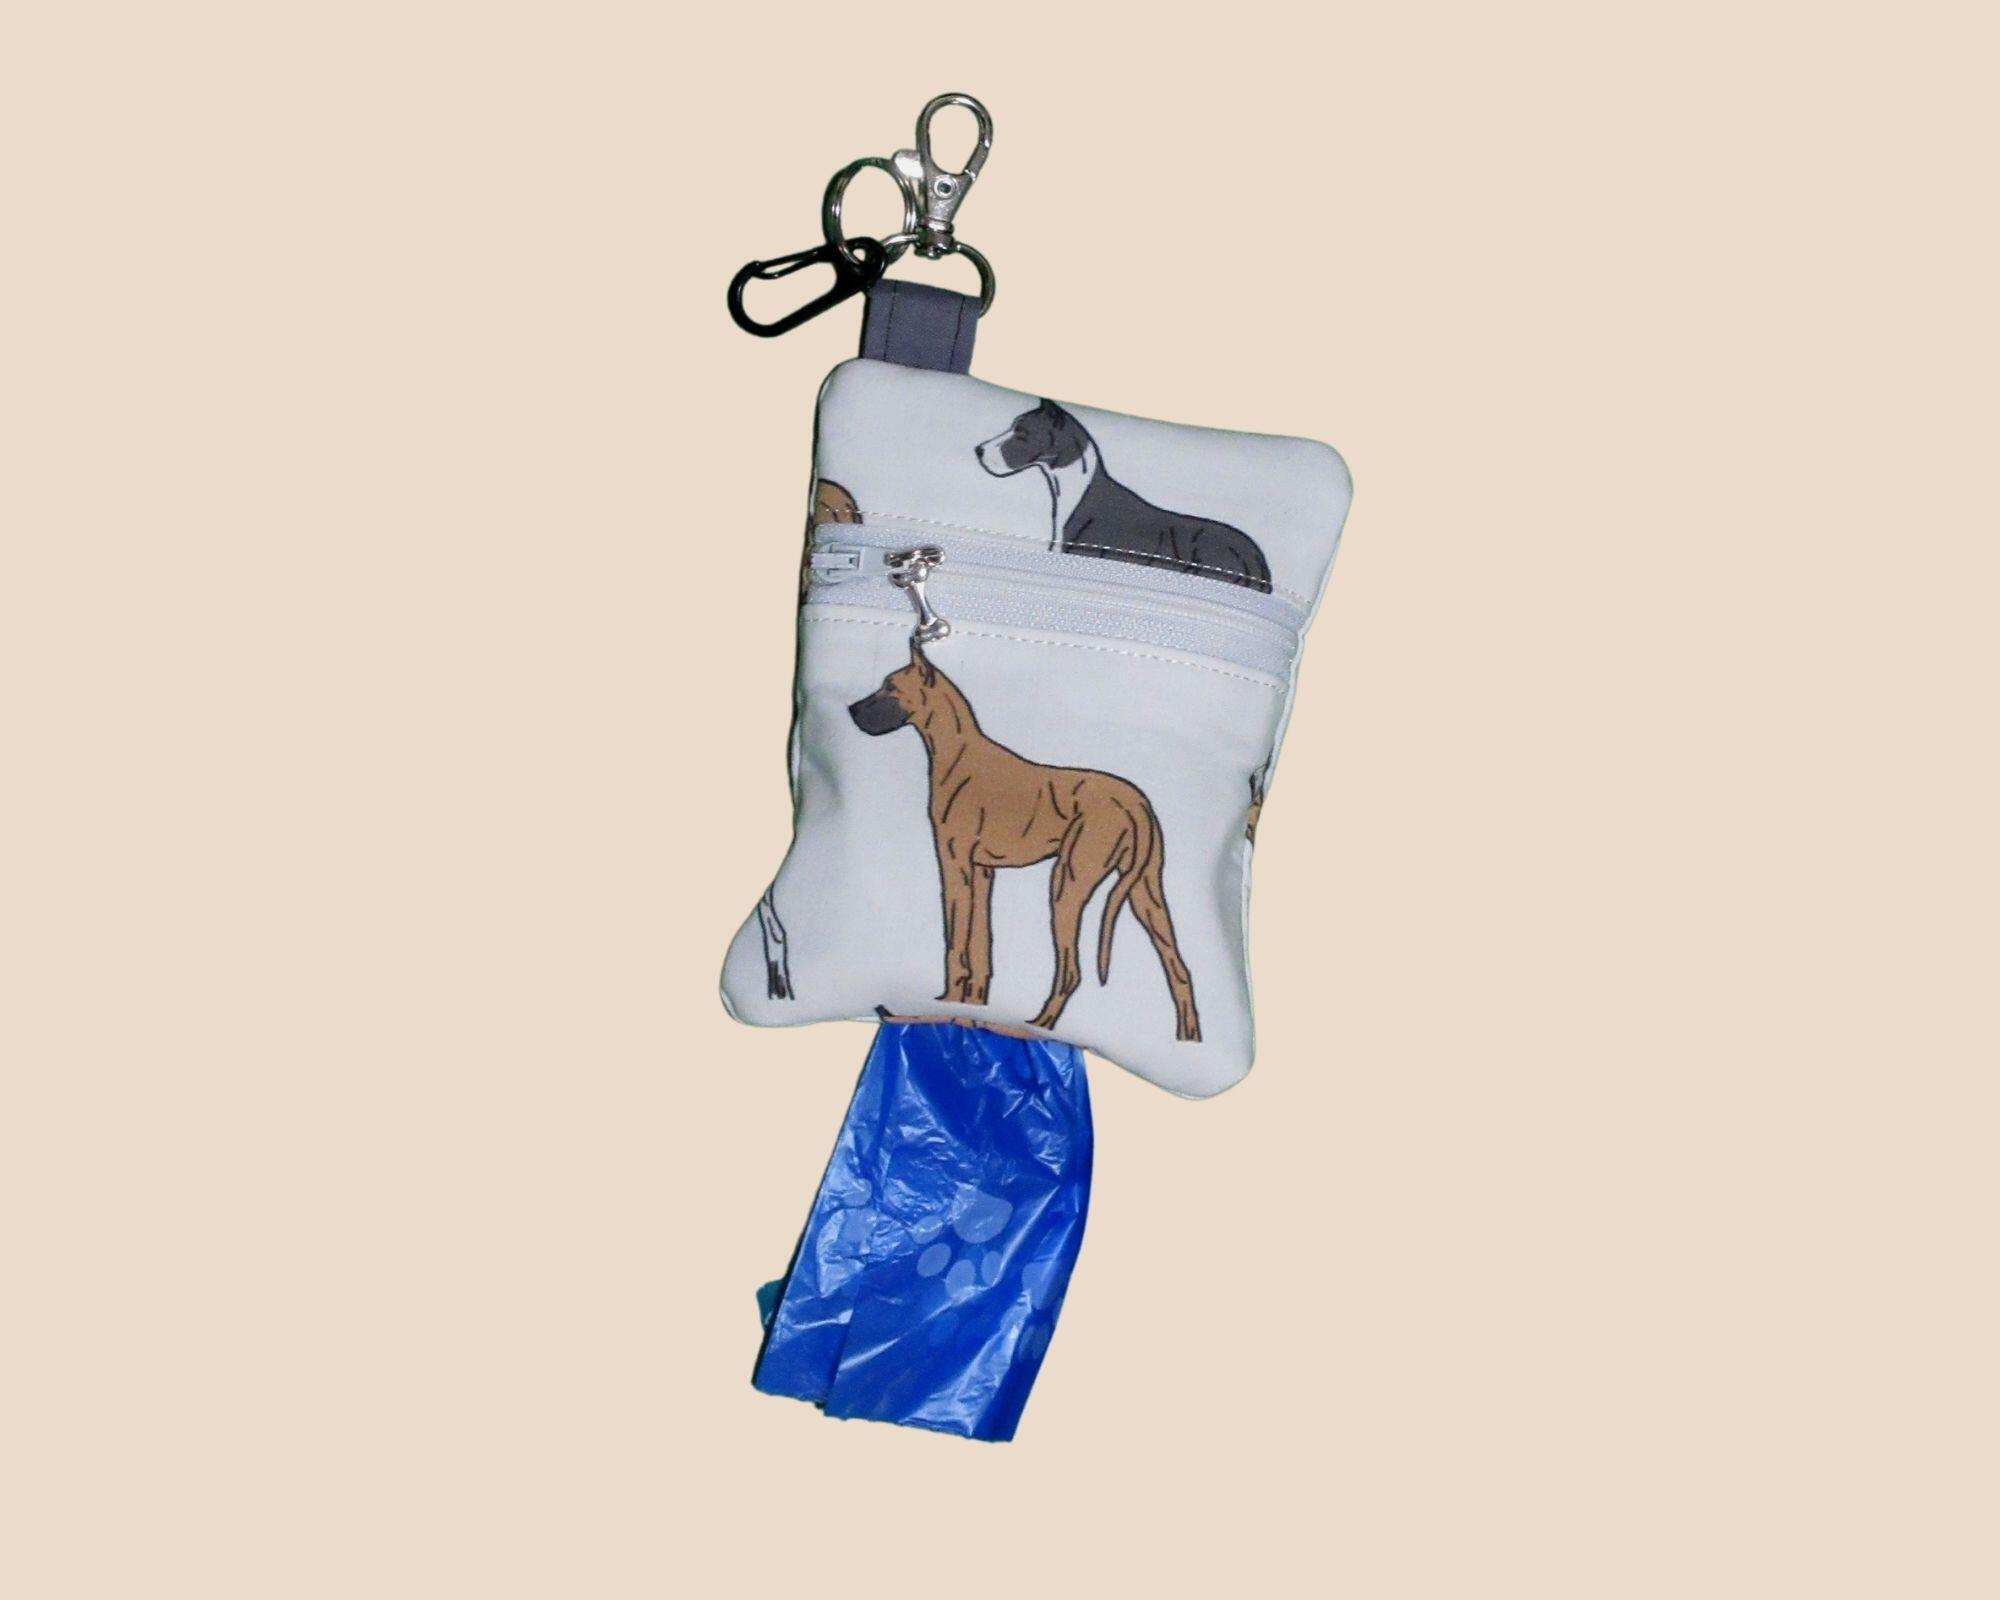 Know someone with a Great Dane?  They will need a Dog Poop Bag Holder.

A little larger than the standard dispenser - can hold a roll of big bags.
Showcases the various Dane shadings and is lined in quilt cotton.  Open with a zipper and clip to the leash.